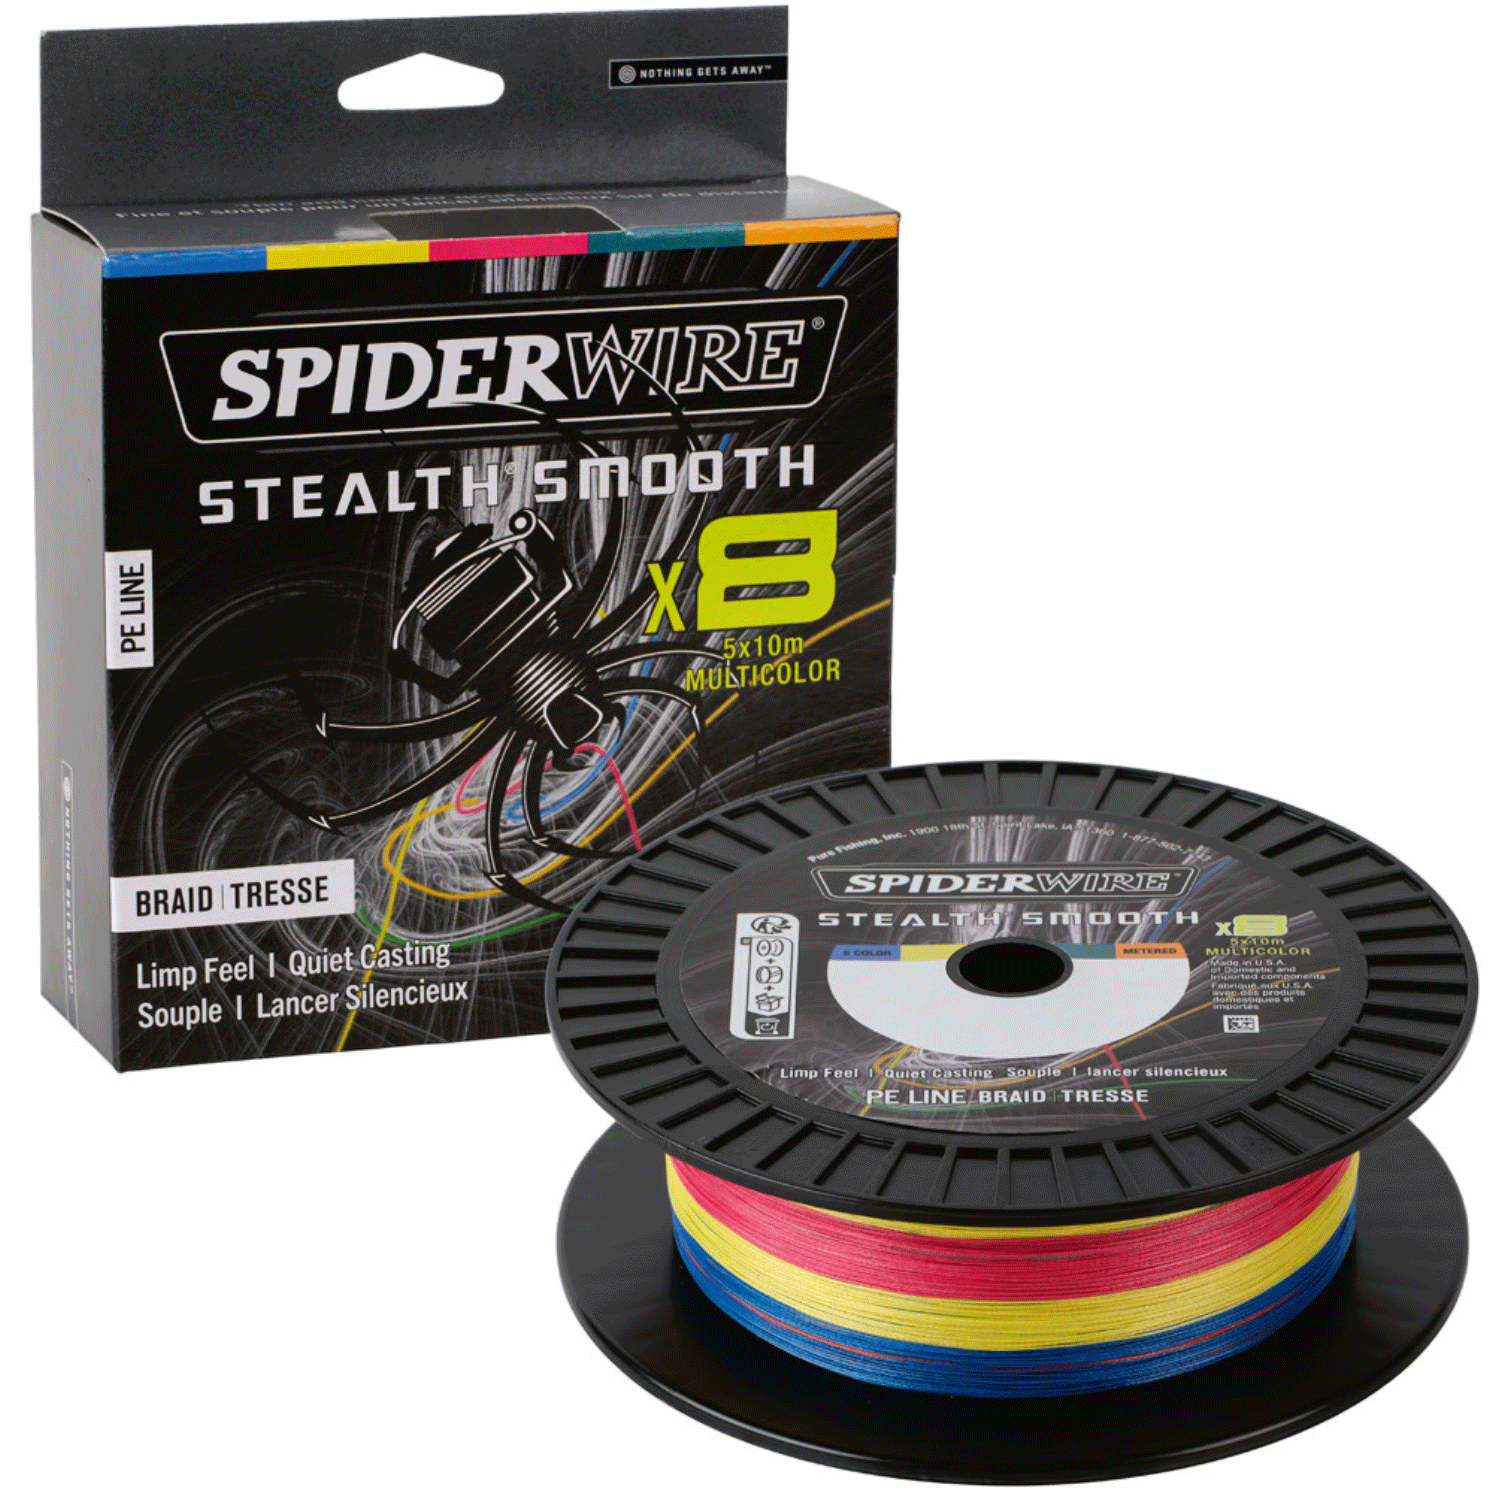 SpiderWire Stealth Smooth8 Braid - Multicolour – Glasgow Angling Centre